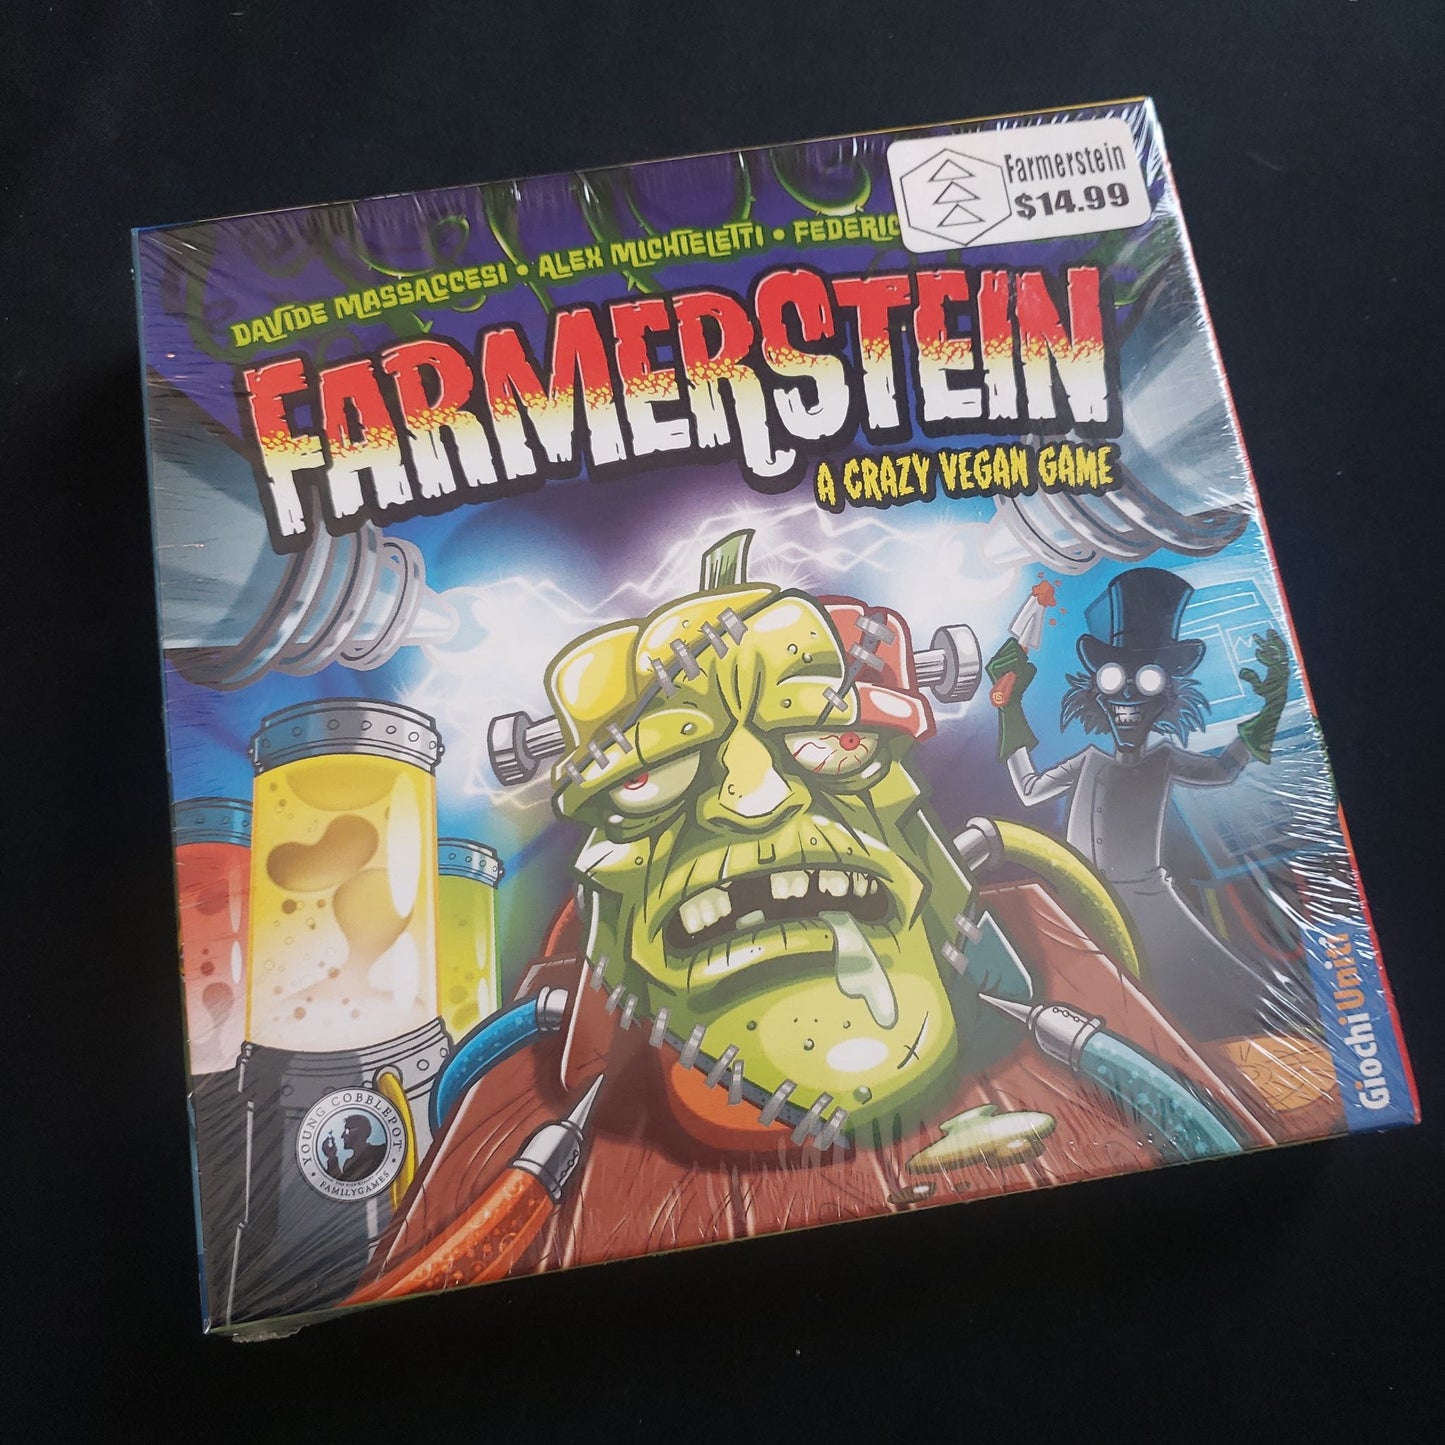 Image shows the front cover of the box of the Farmerstein card game